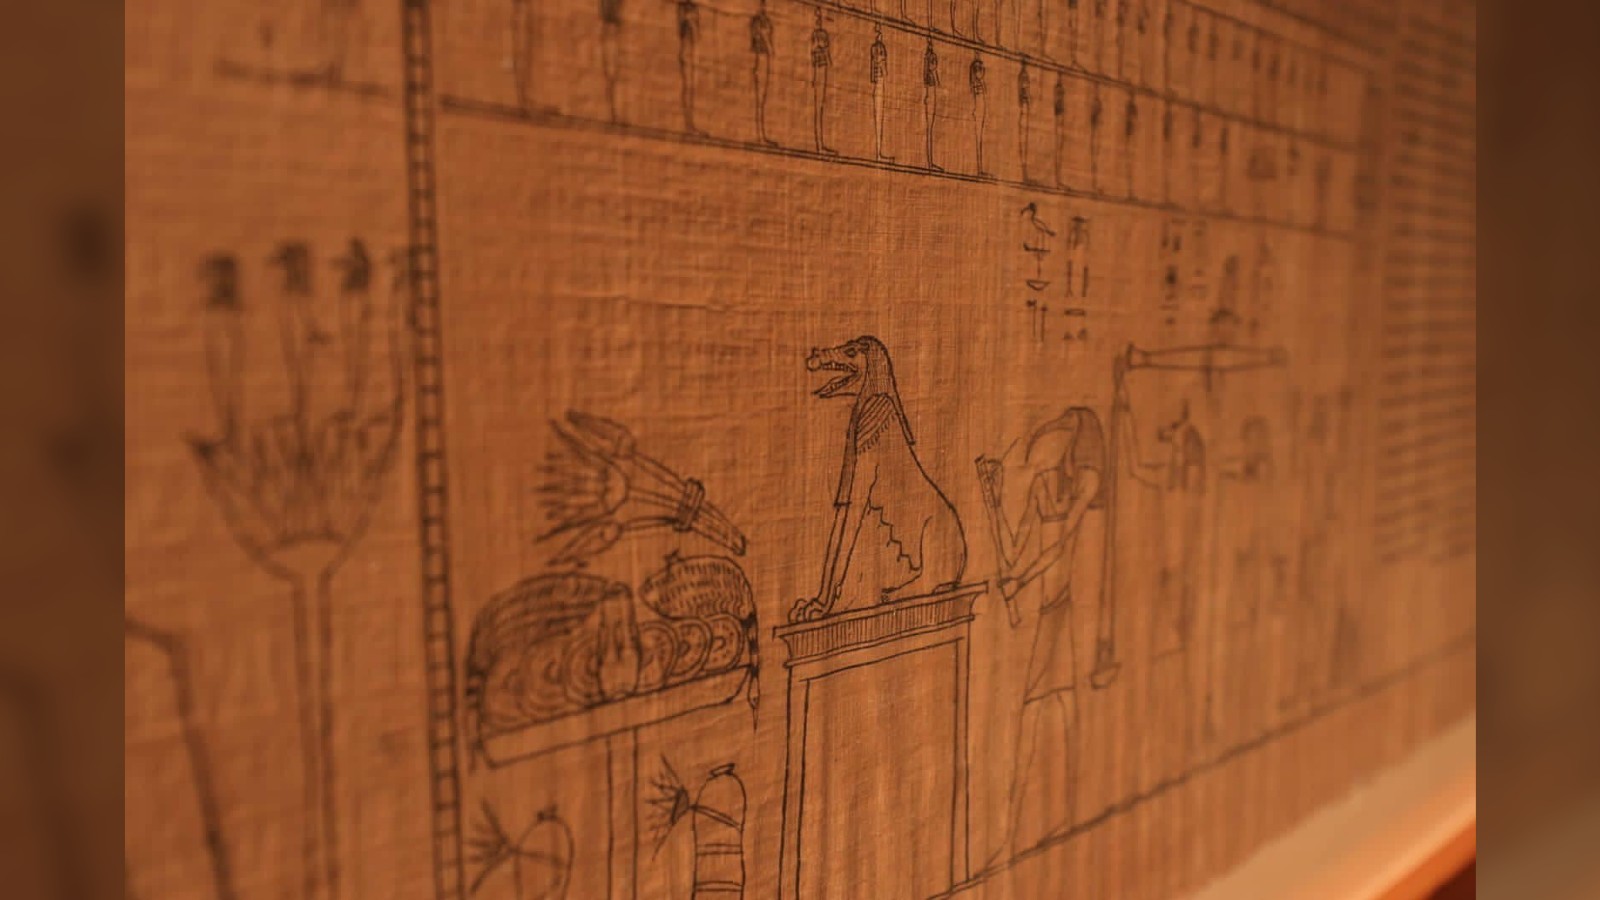 This close-up from the Book of the Dead shows a creature (with a long snout and sitting back on its hind legs like a dog,), possibly Ammit, sitting before Osiris, the Ancient Egyptian god of the underworld.